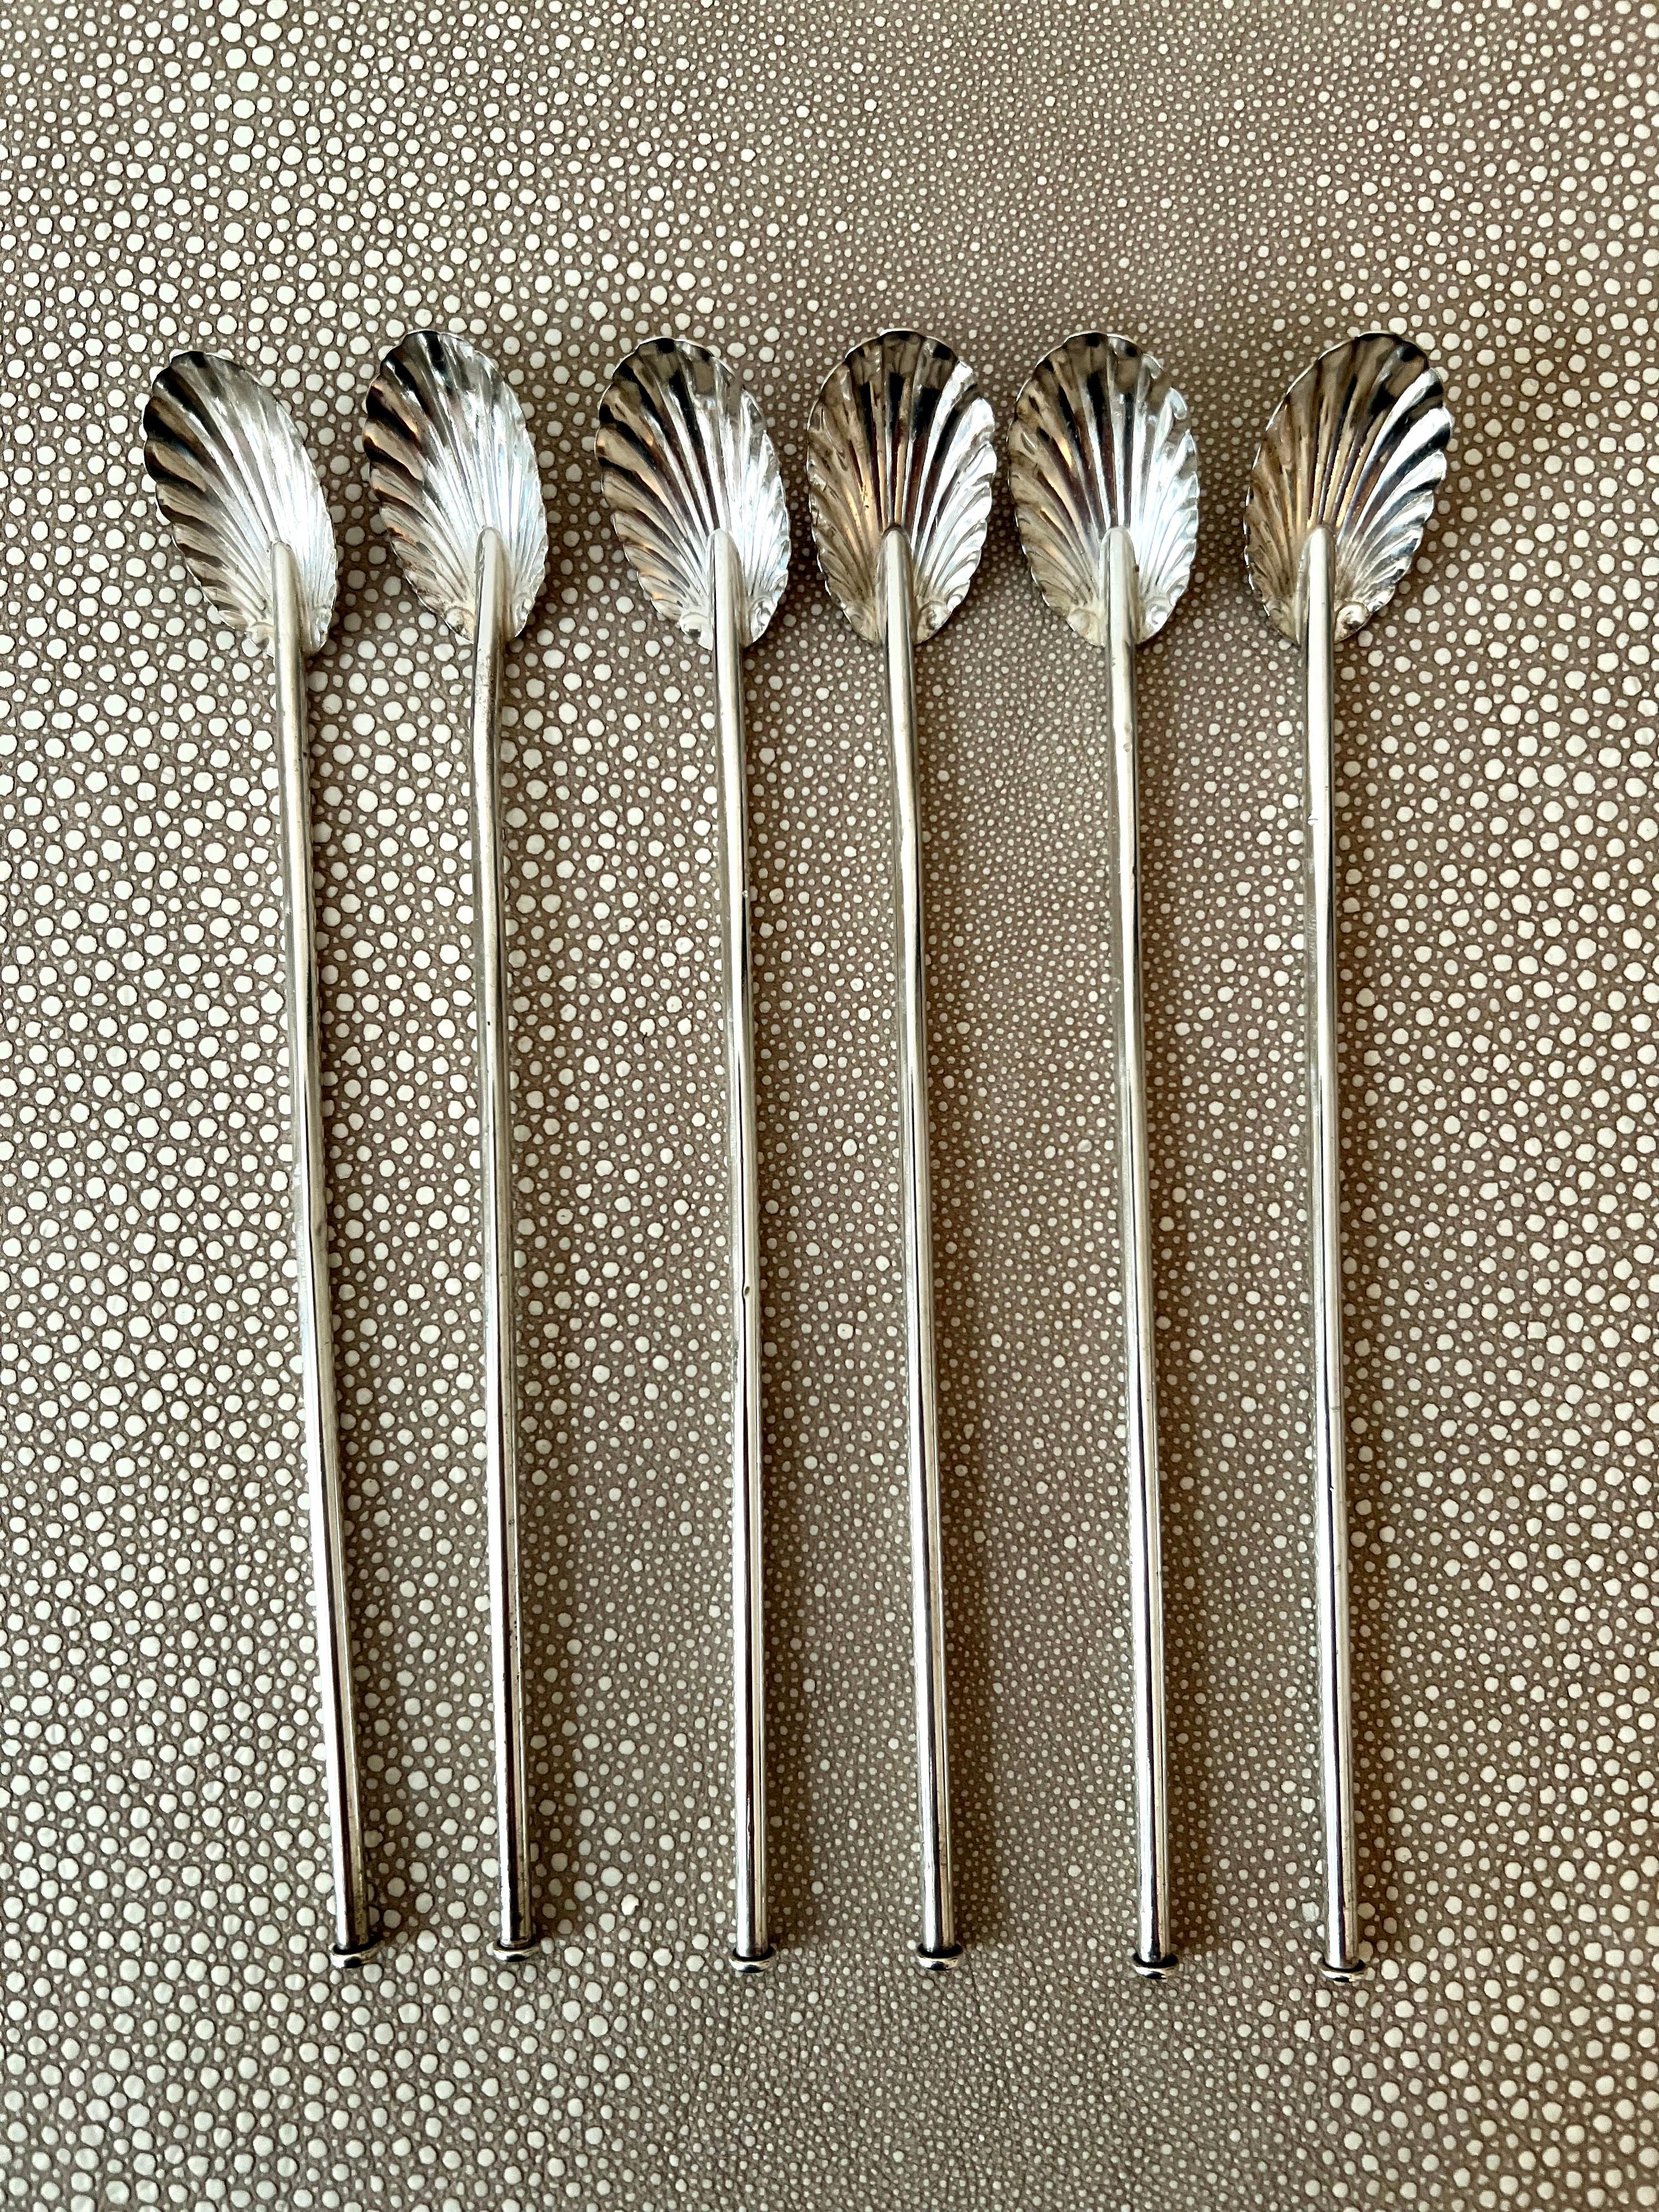 Sterling Silver 6 French Sterling Iced Tea Scallop Clam Shell Spoons For Sale